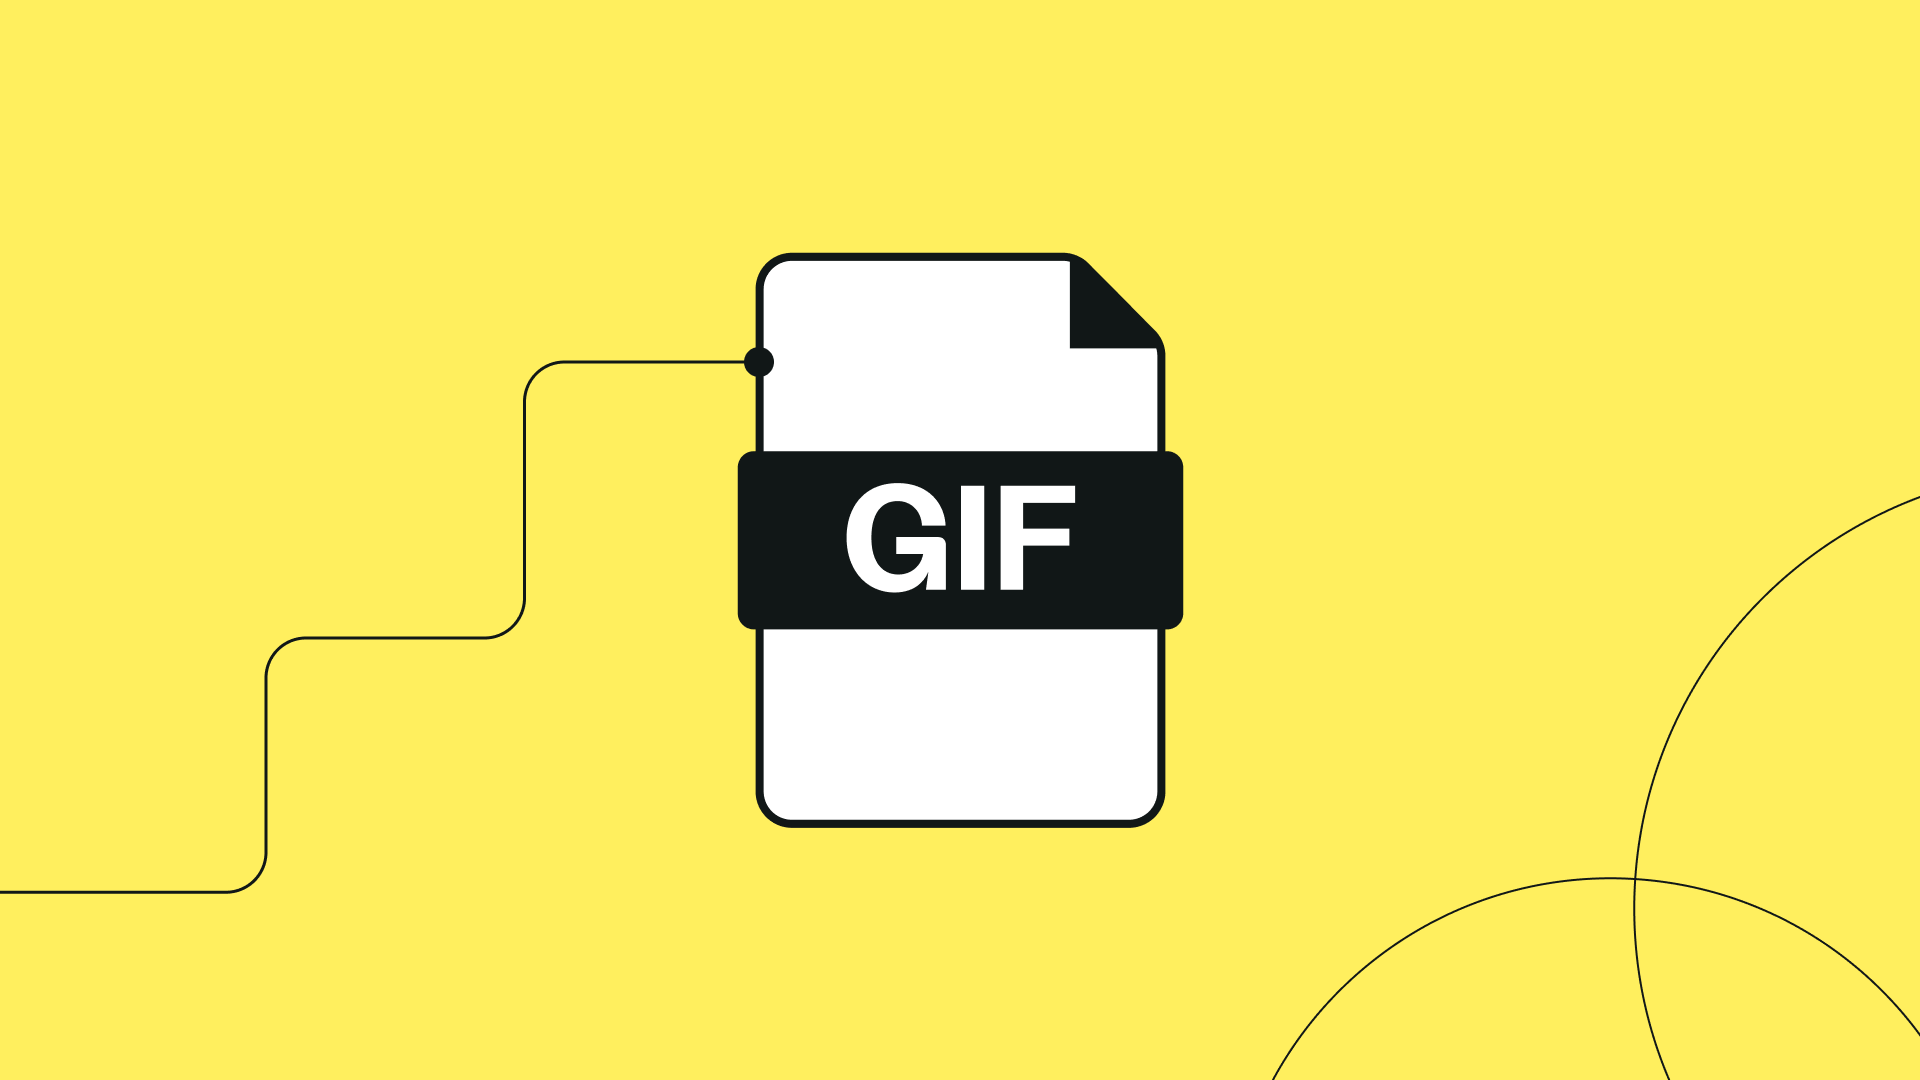 How to create your own GIFs